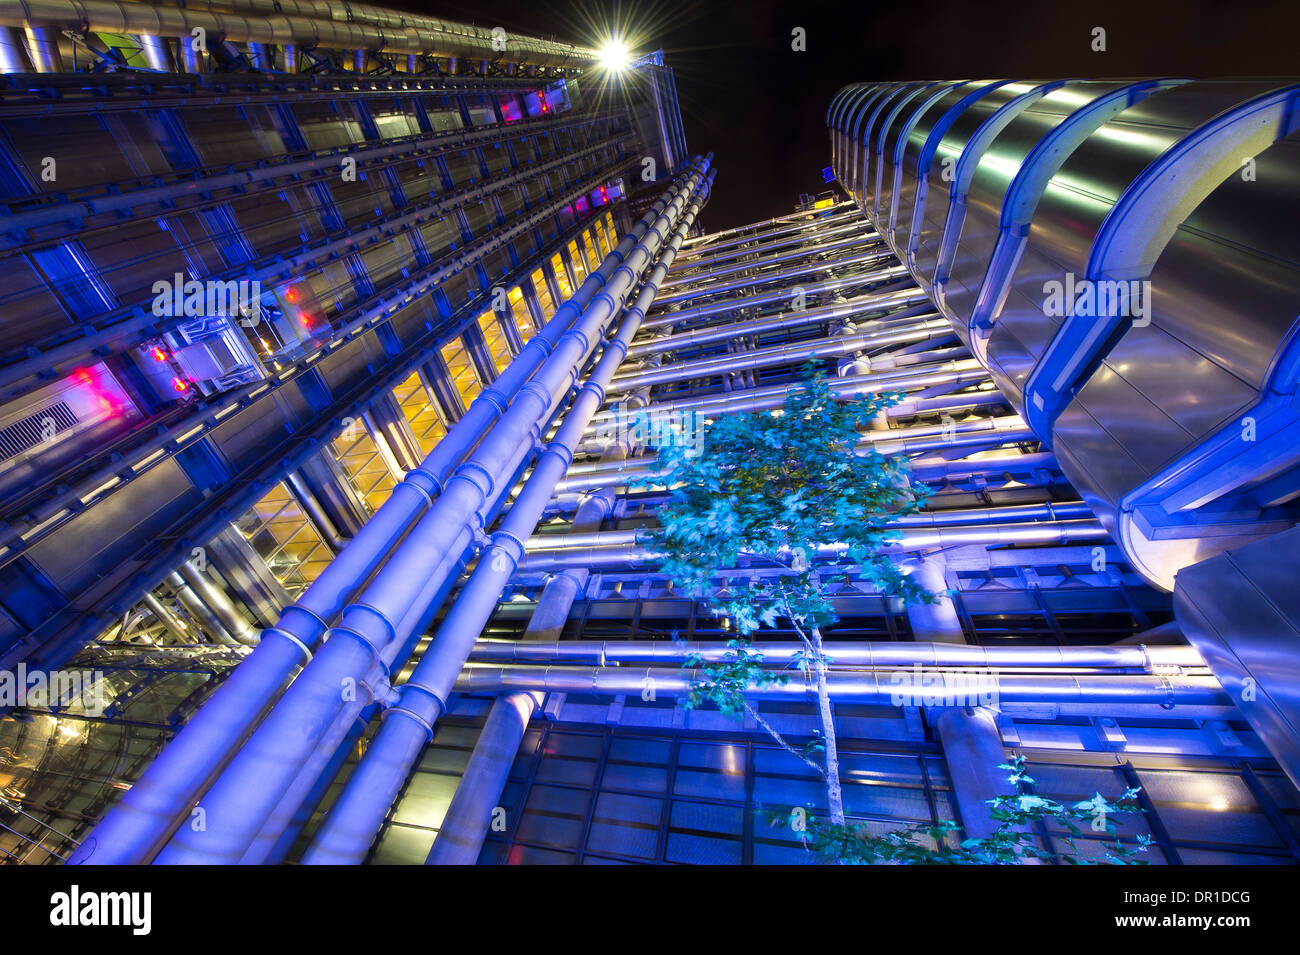 Evening view of the famous Lloyds Building in the City of London, England. Stock Photo